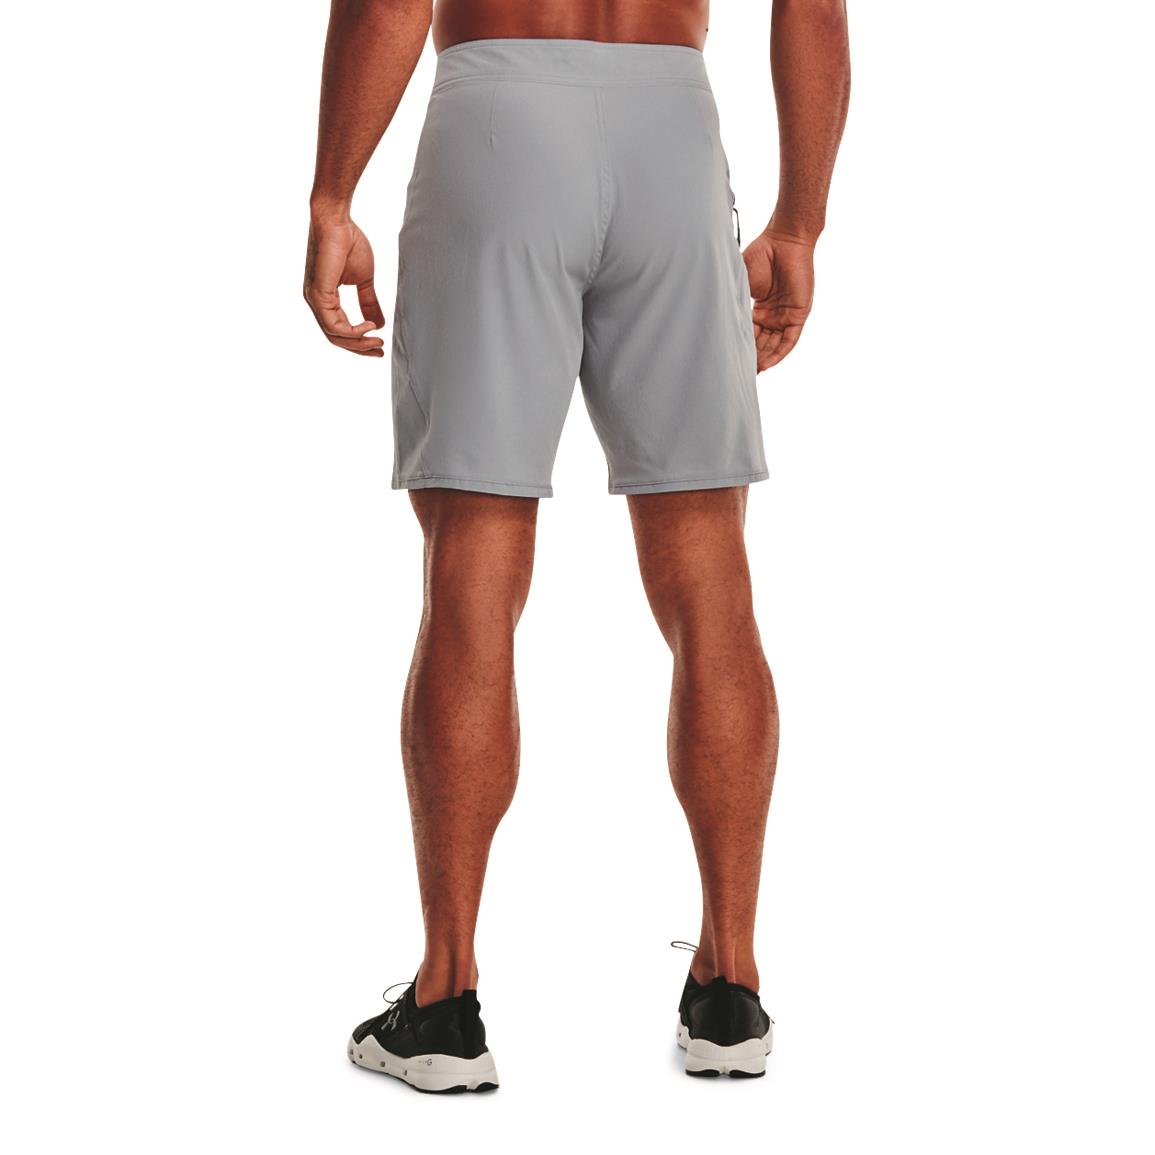 Guide Gear Men's Ripstop Cargo Shorts - 621472, Shorts at Sportsman's Guide